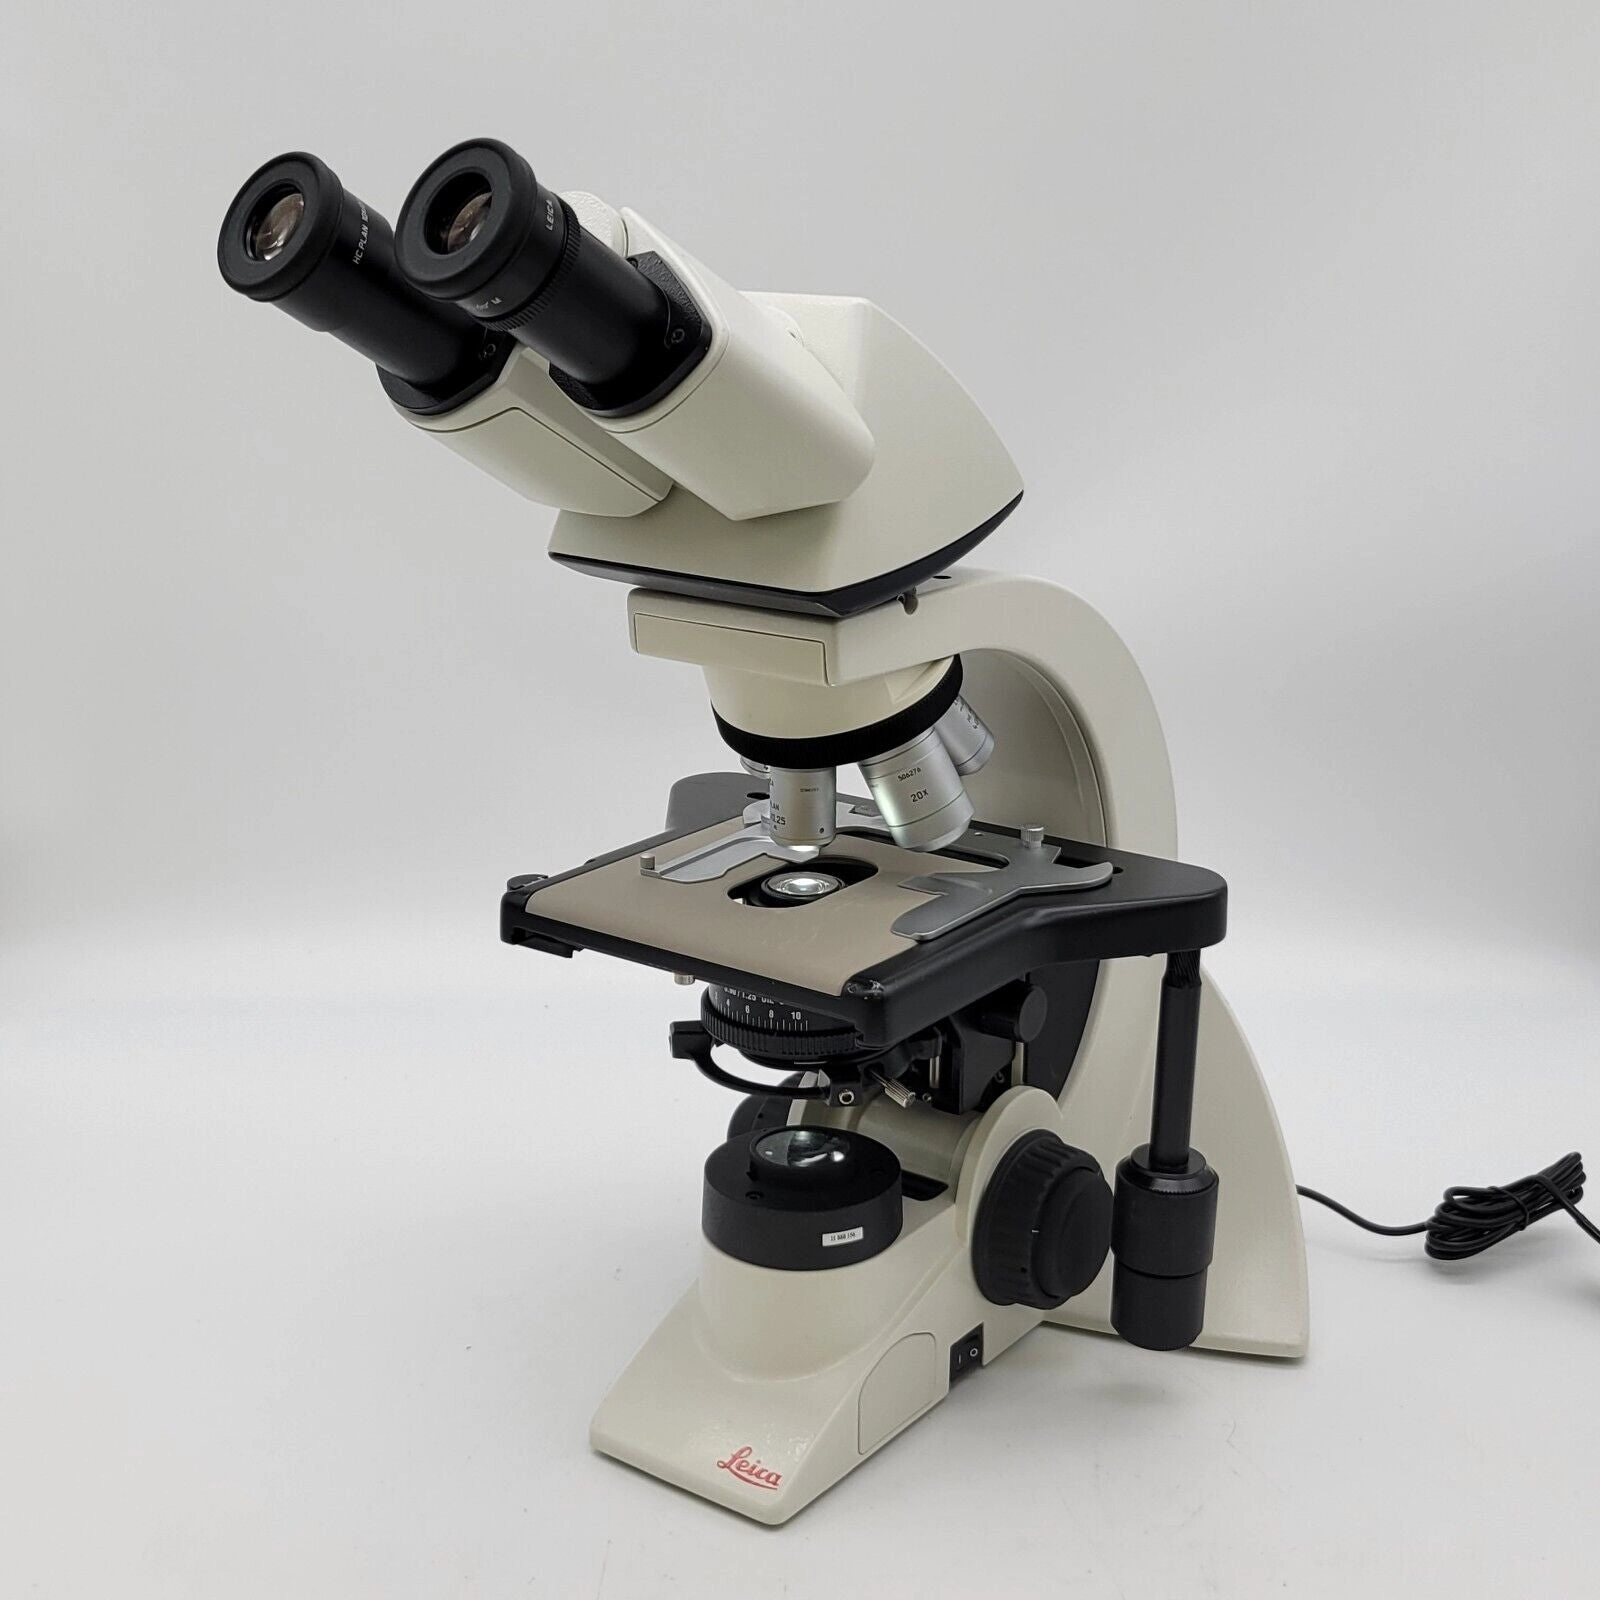 Leica Microscope DM1000 LED with 5x, 10x, 20x, 40x, and 100x Objectives